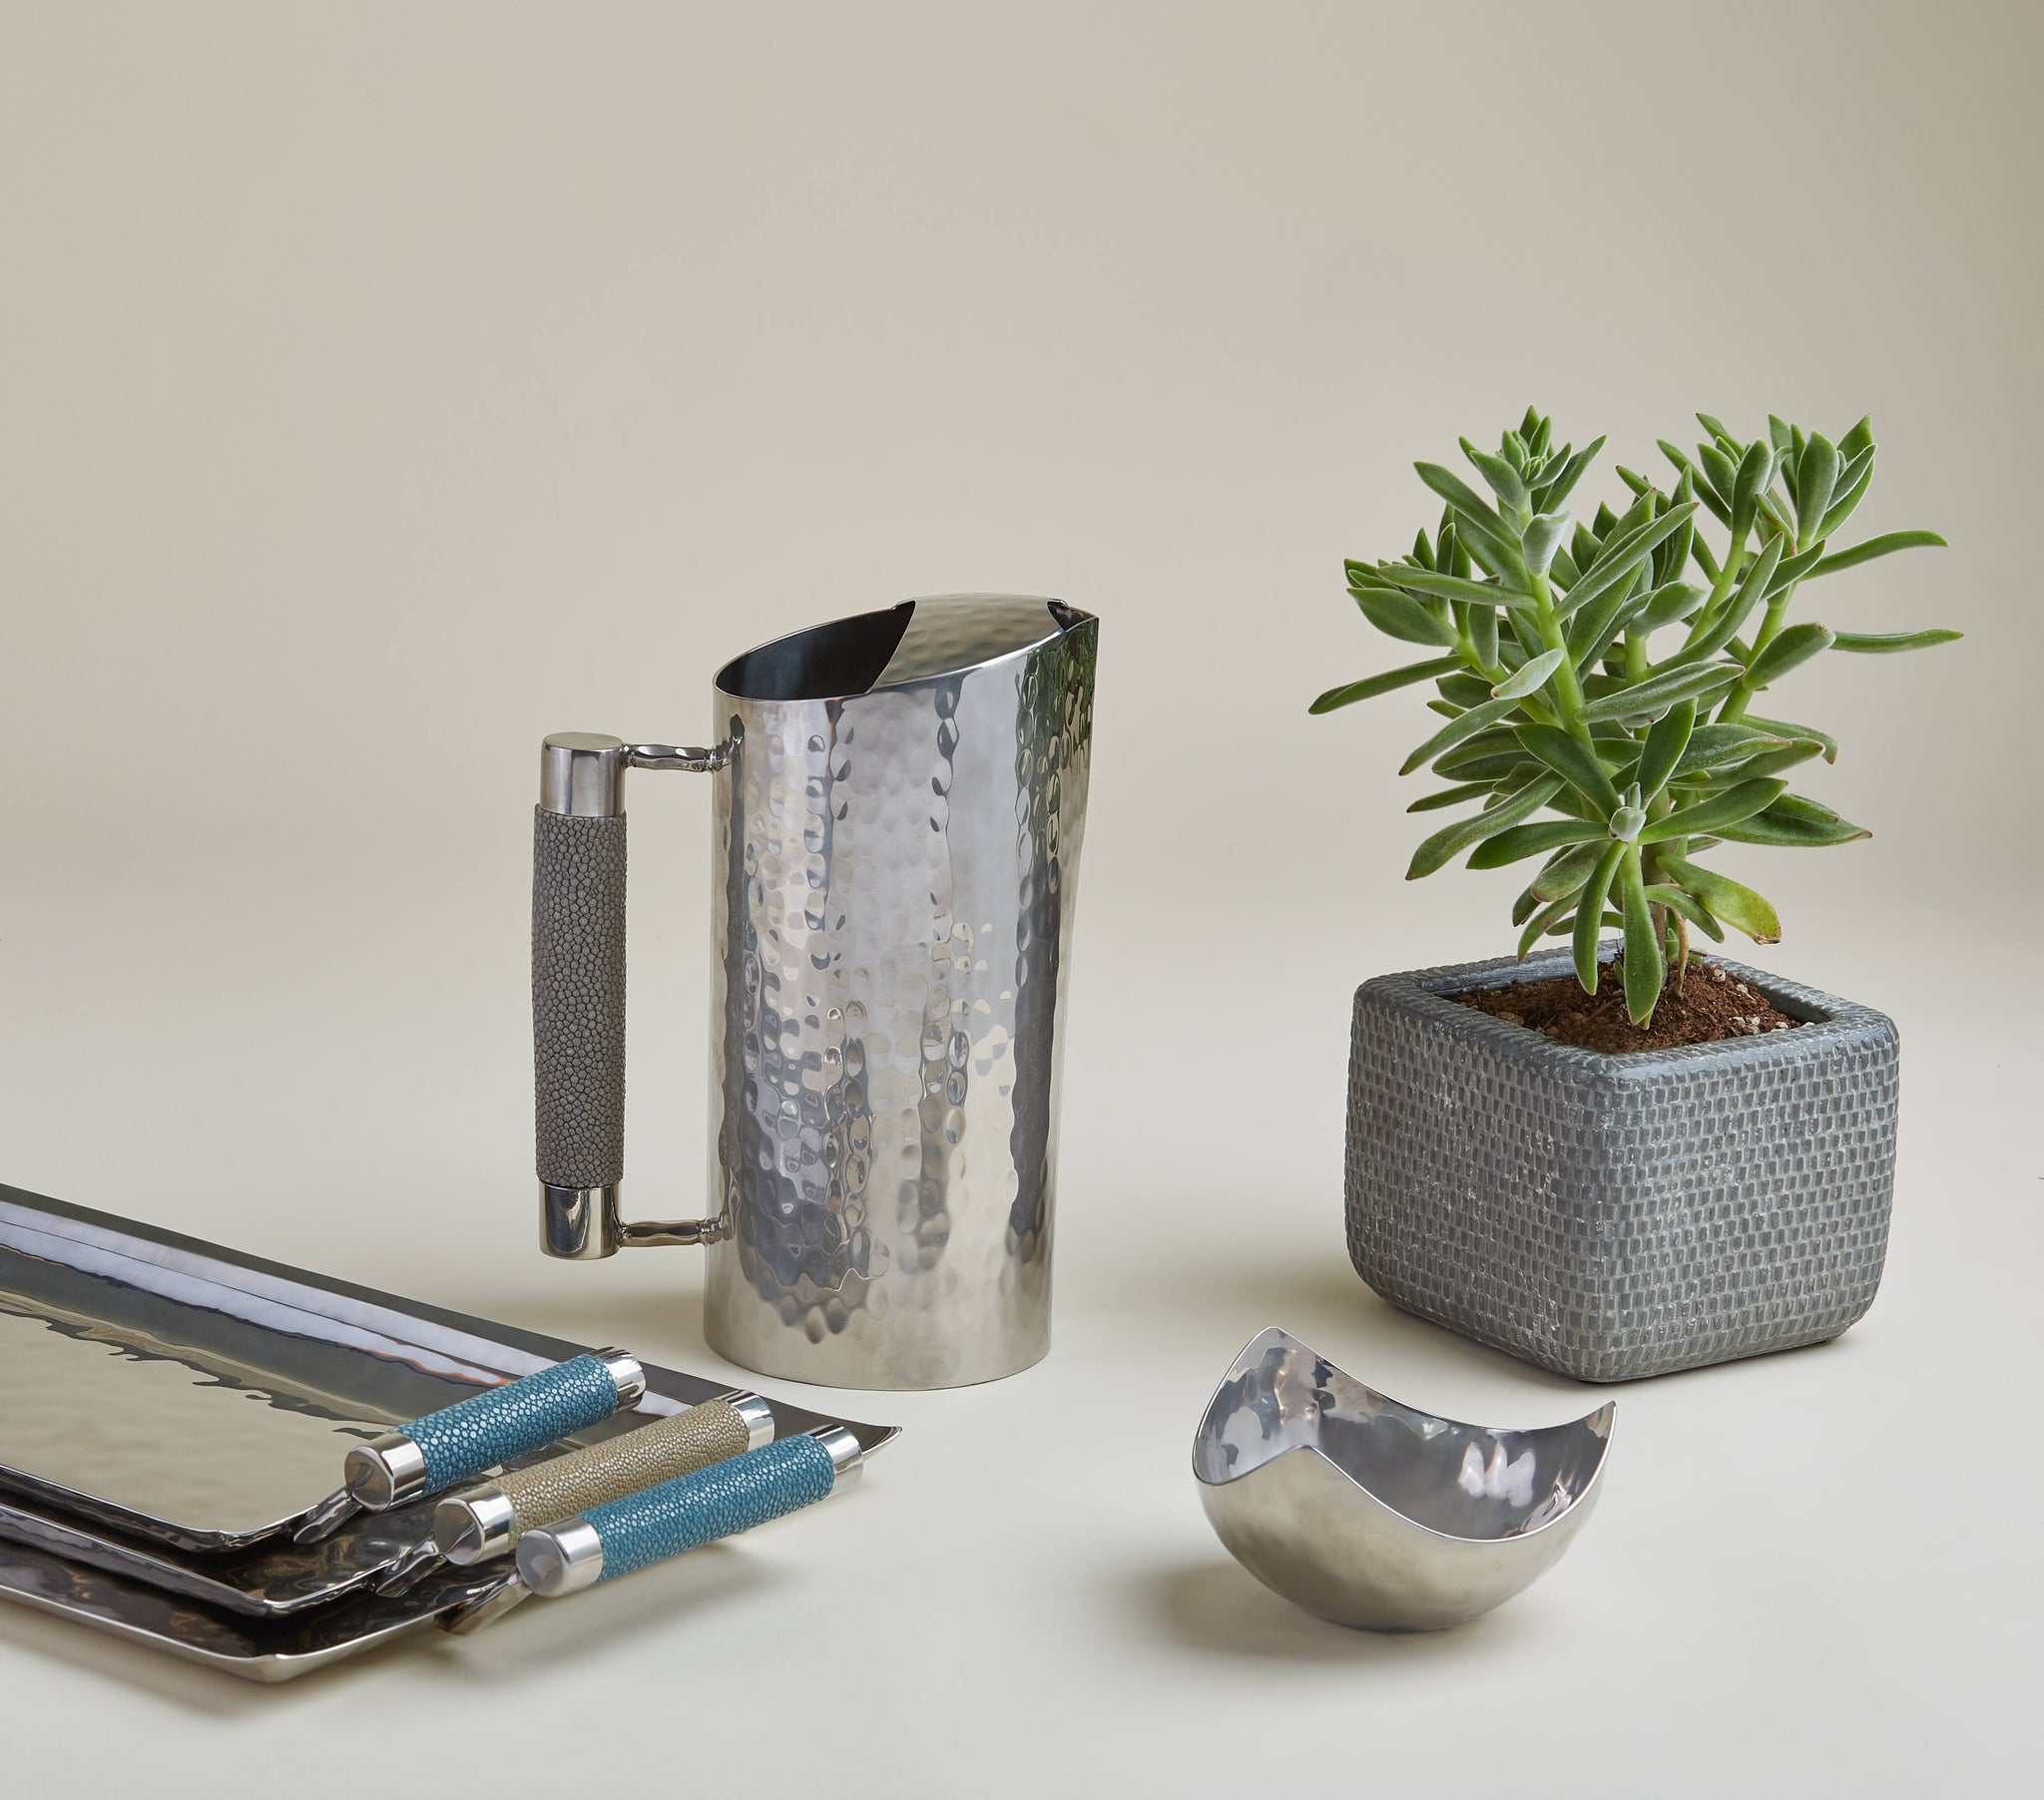 Stainless steel pitchers and trays with leather accents